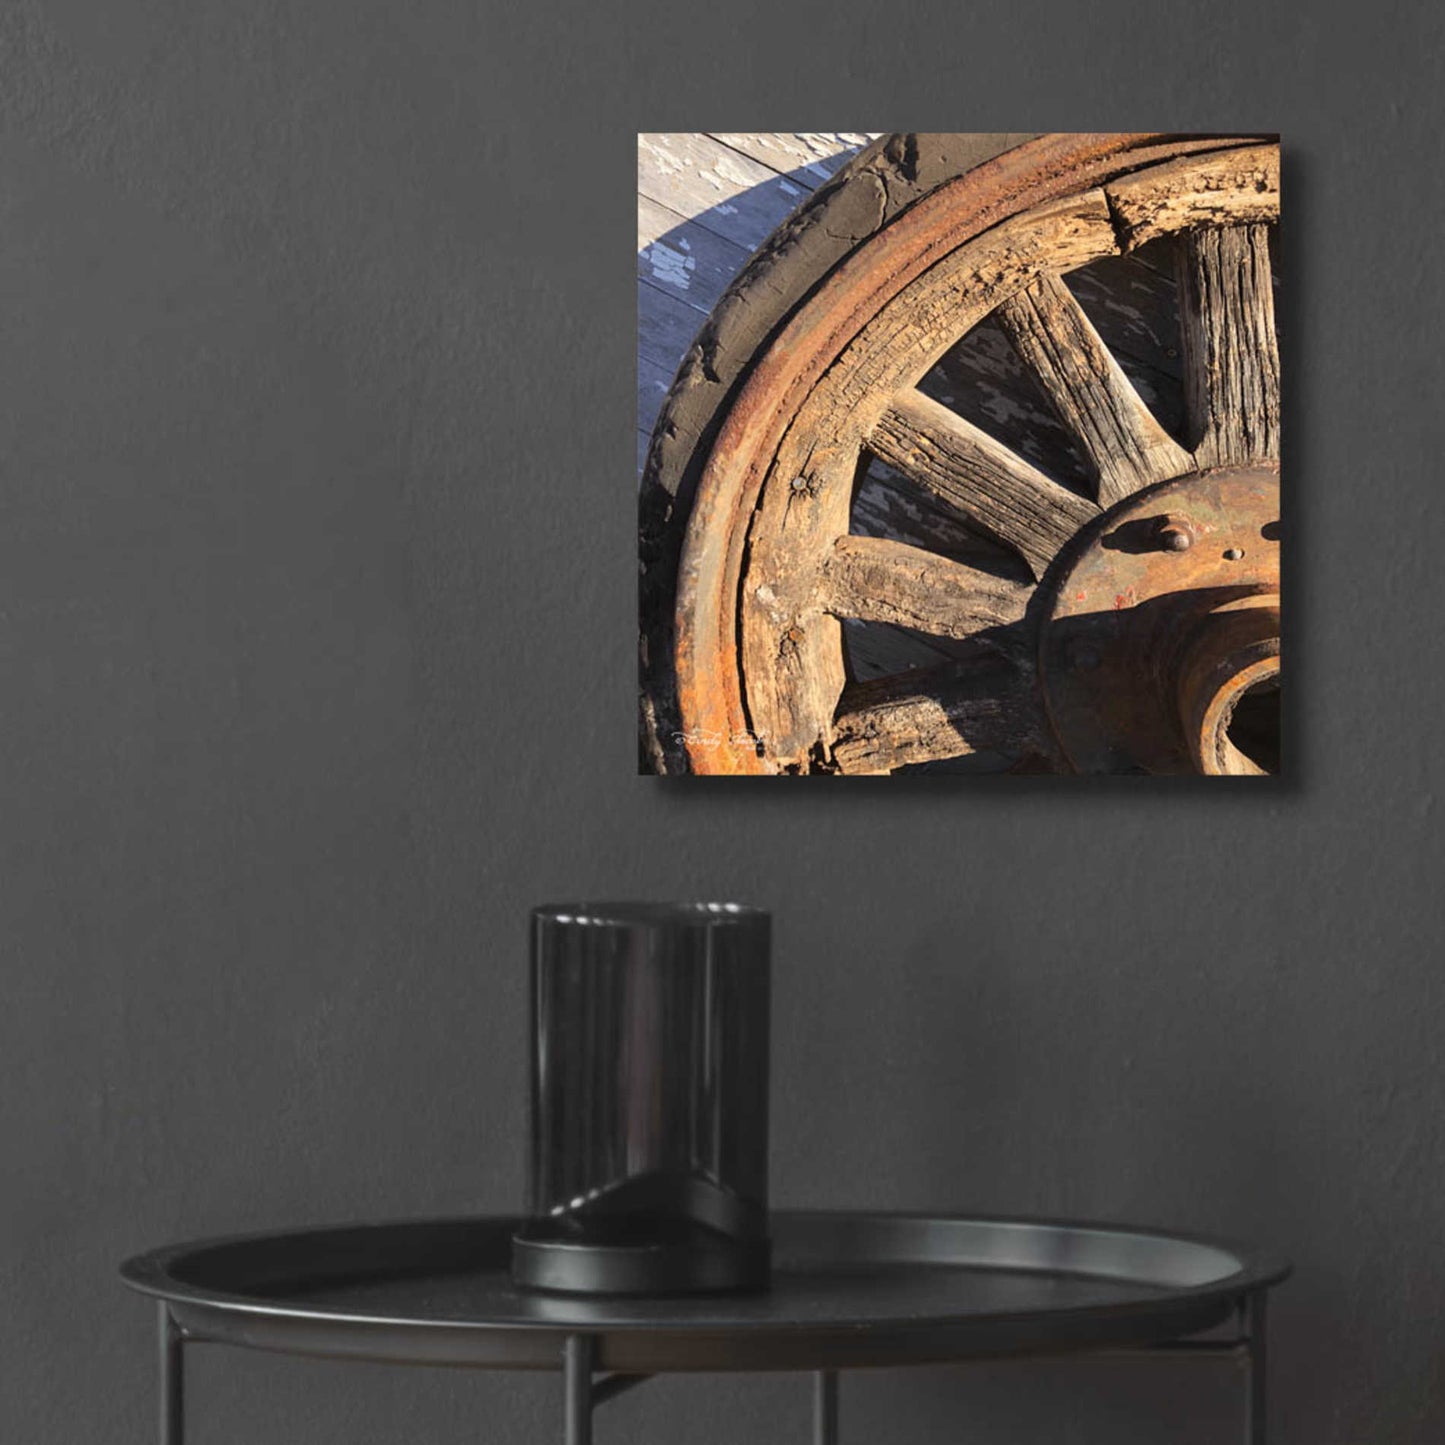 Epic Art 'Old Wheel I' by Cindy Jacobs, Acrylic Glass Wall Art,12x12